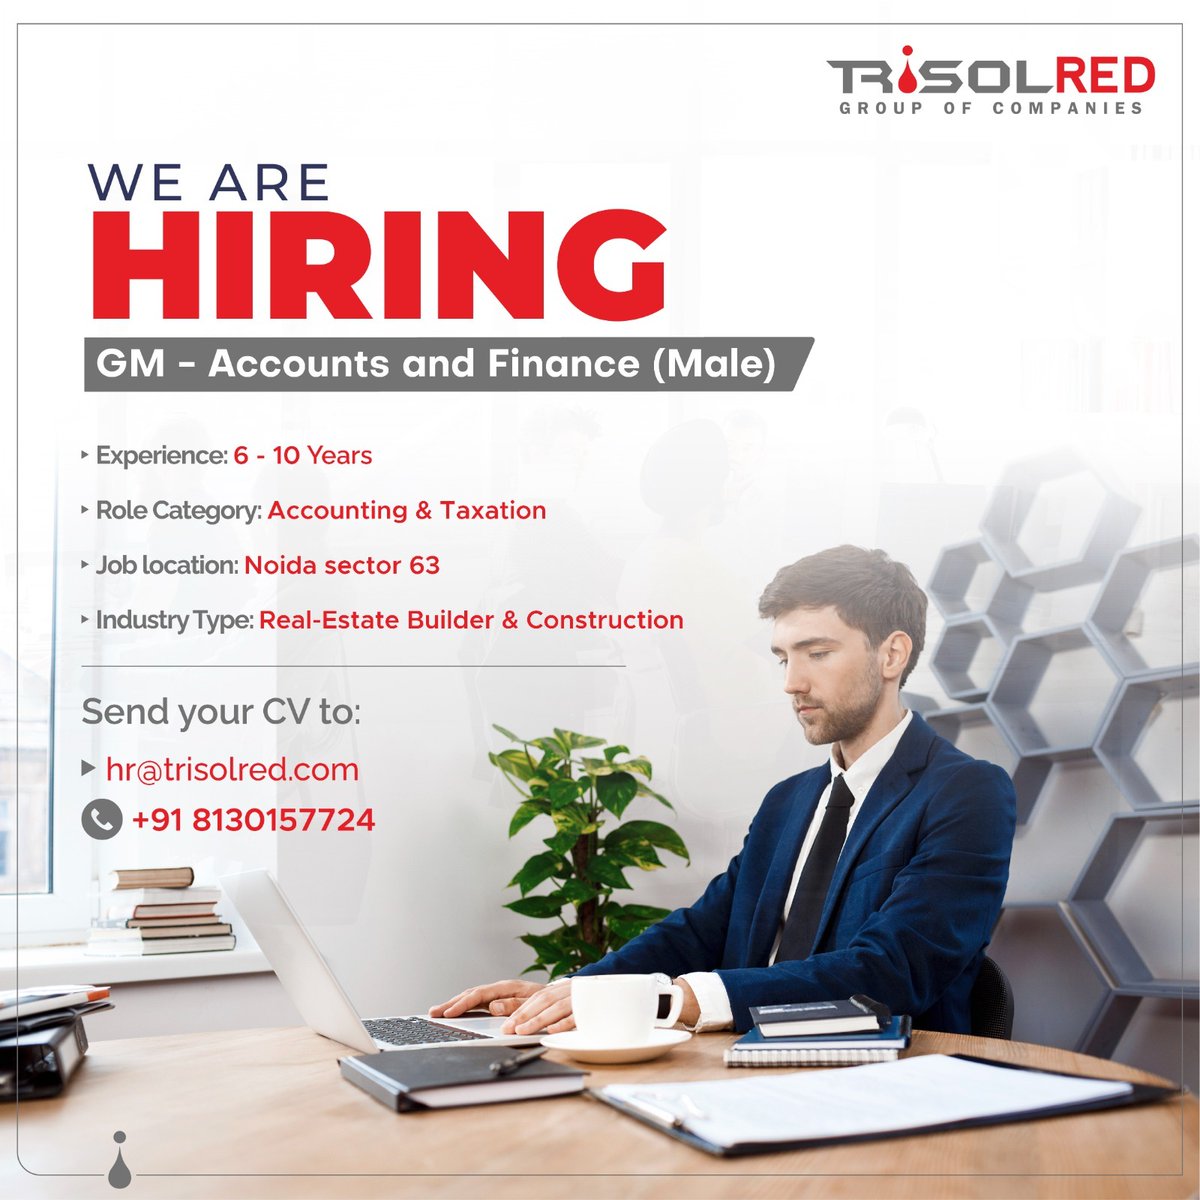 Join our dynamic team! 🚀 
We're seeking an experienced Account Manager - Head to lead the way. Ready to make an impact? Send your CV today! 

#TrisolRED #Trisol #HiringNow #AccountManager #LeadershipOpportunity #RealEstate